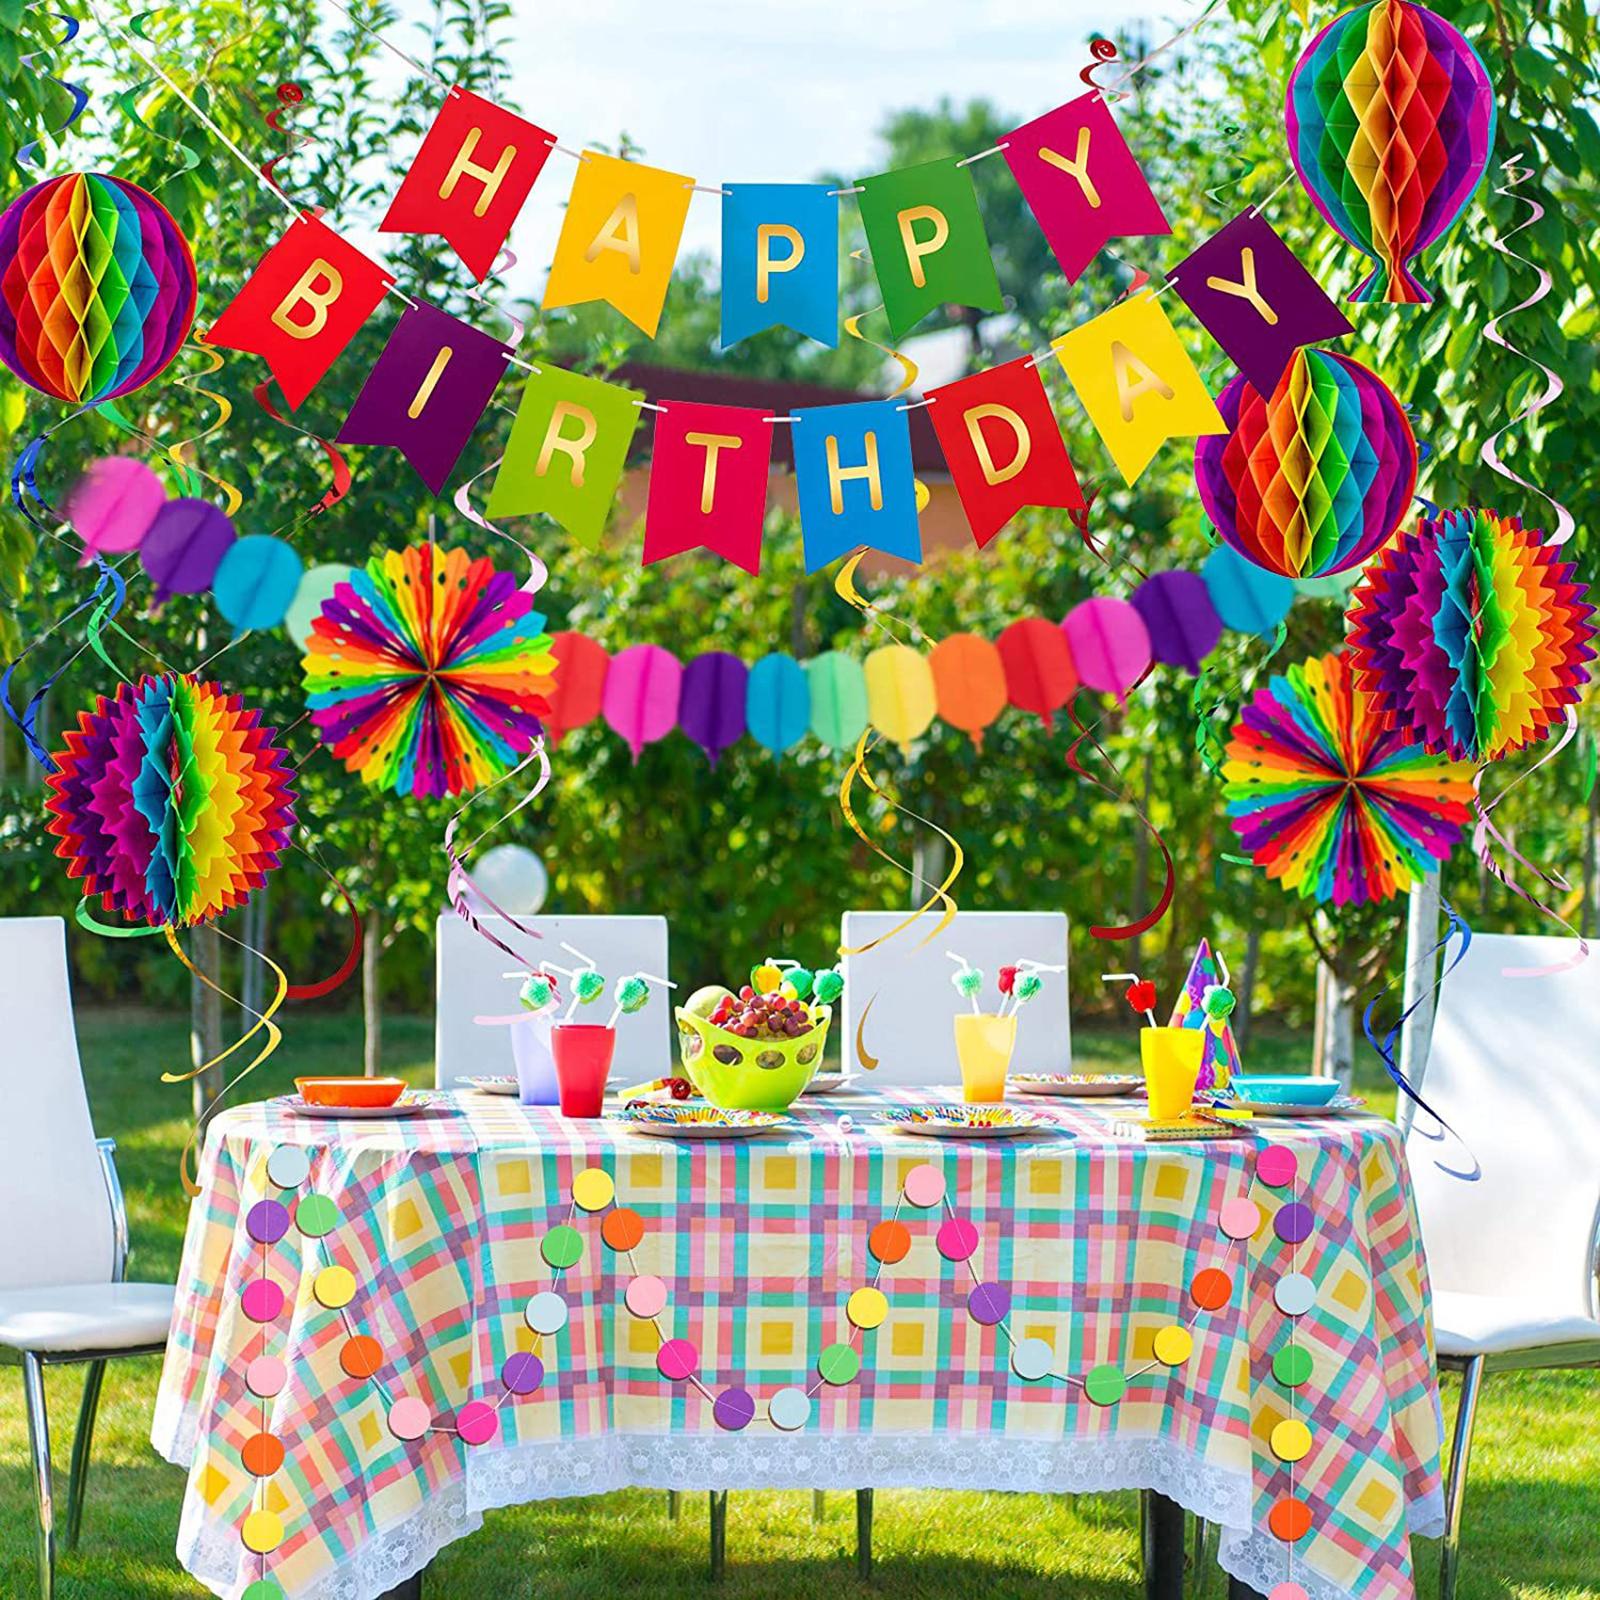 Romantic Happy Birthday Banner Flag Band Paper Fans Party Decor Colorful